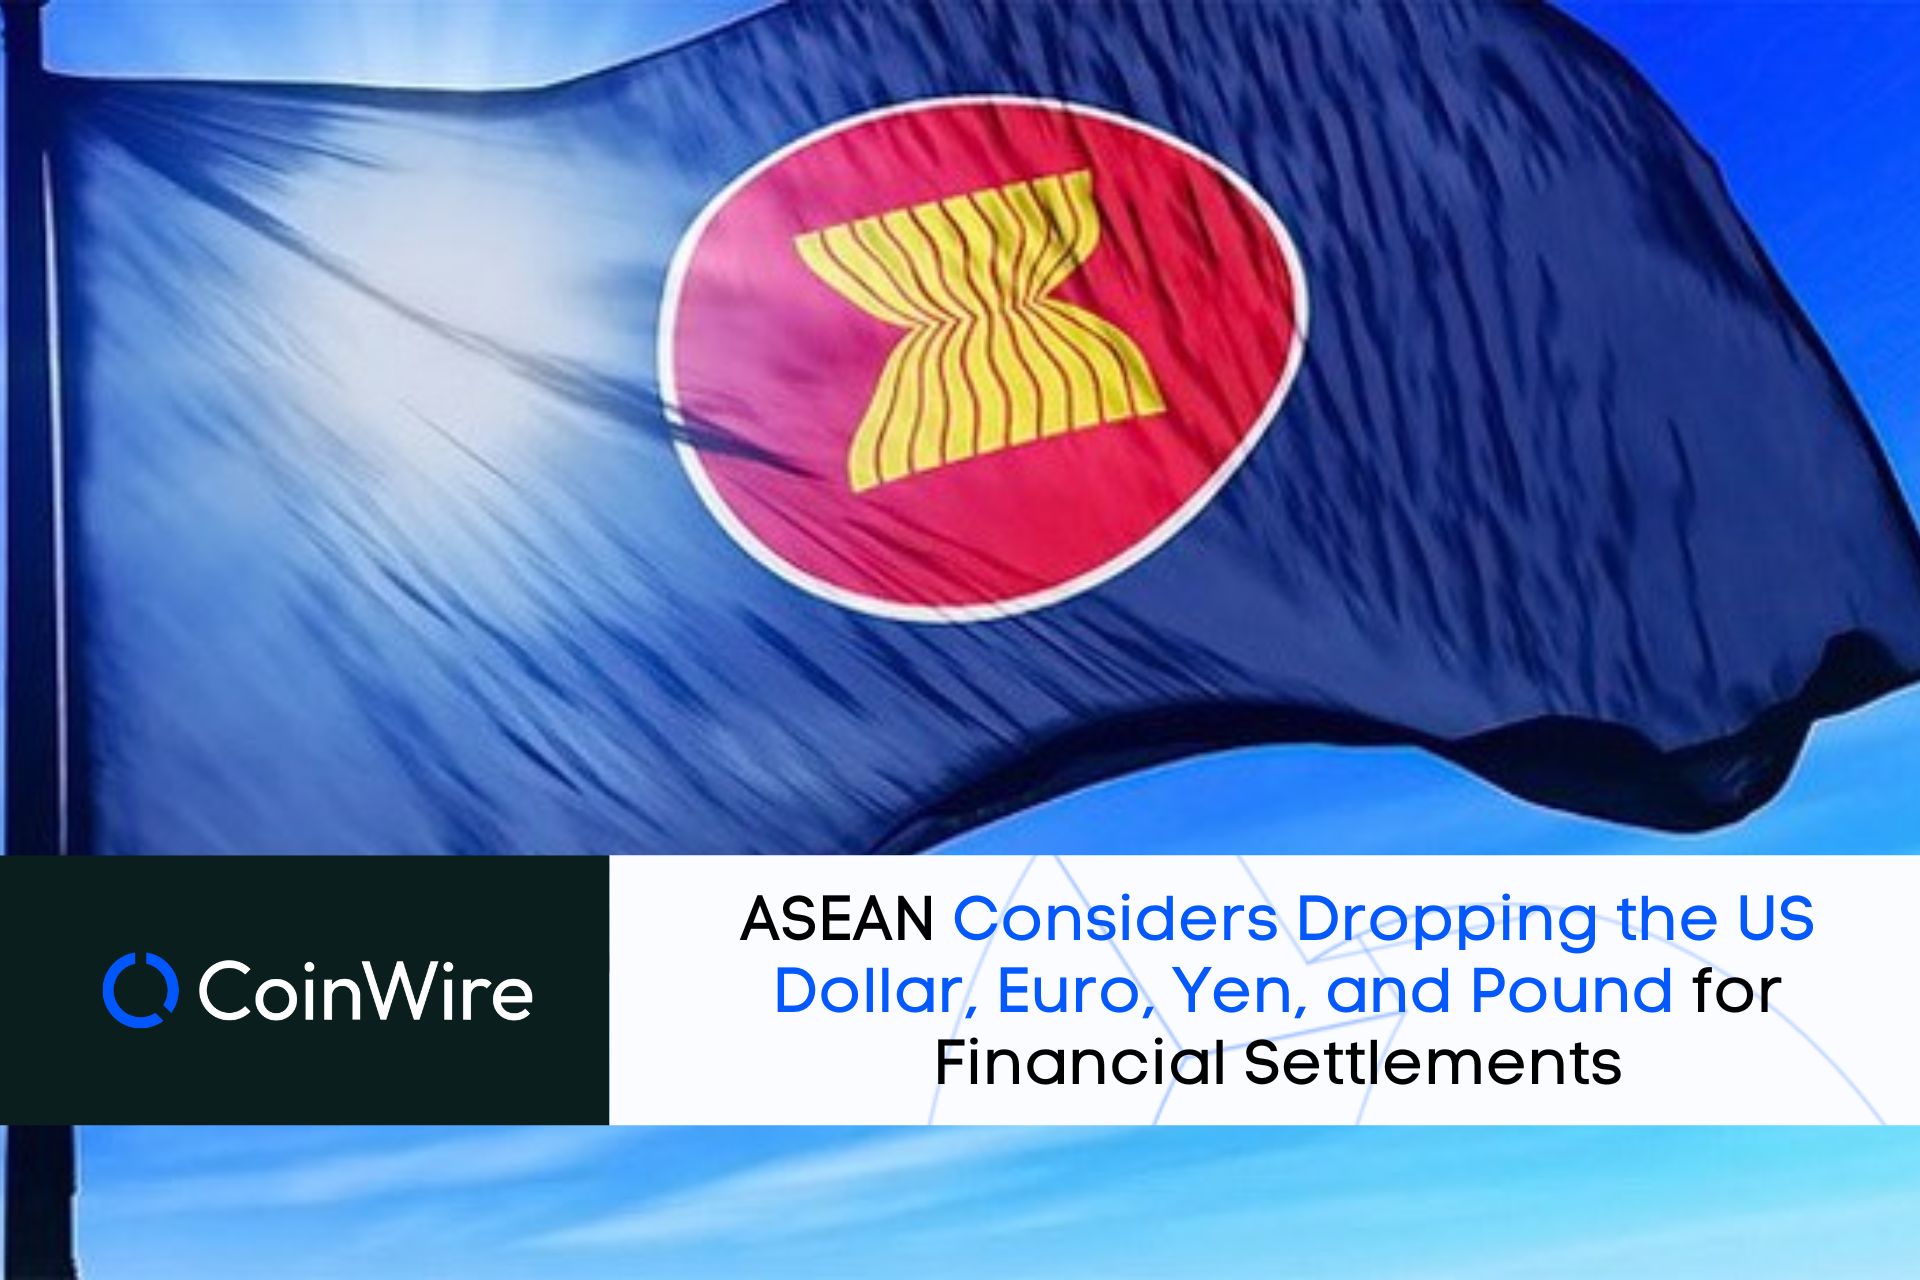 Asean Considers Dropping The Us Dollar, Euro, Yen, And Pound For Financial Settlements